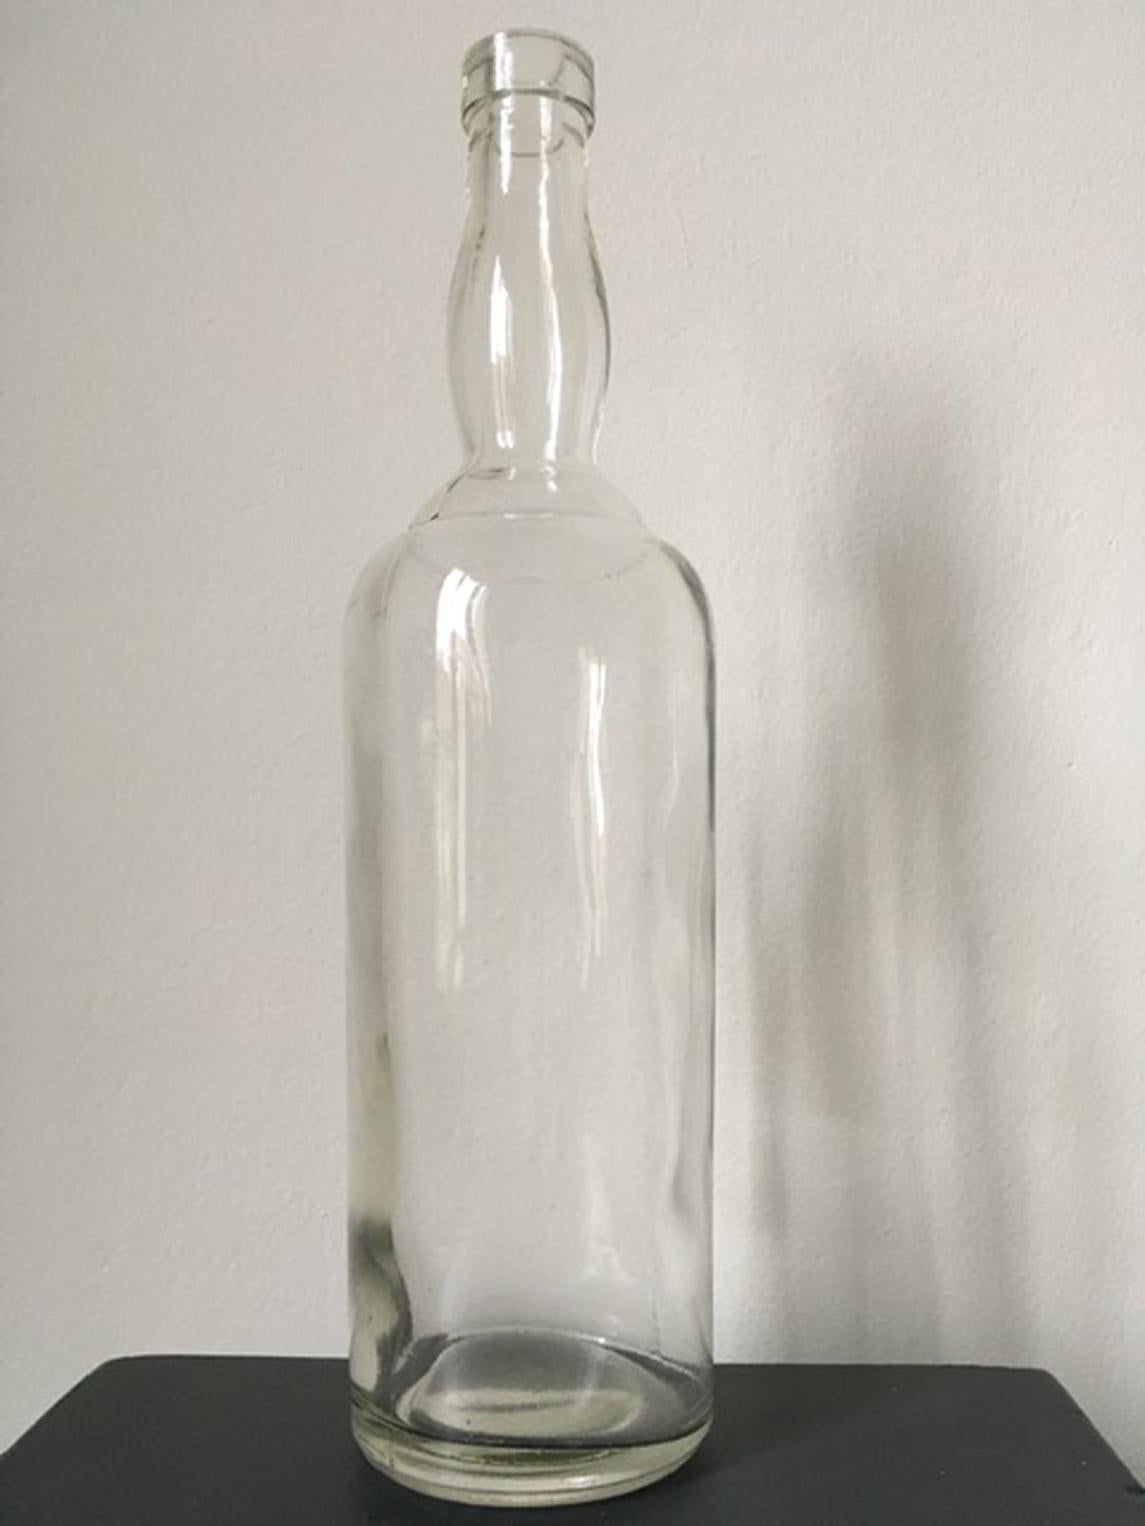 This is charming piece is an Italian glass production and it was made in  1930, by  the well known Italian factory named S.I.V.A. (Società Industriale Vetreria Artistica) and based in Tuscany.
The piece is in  perfect conditions and it is possible